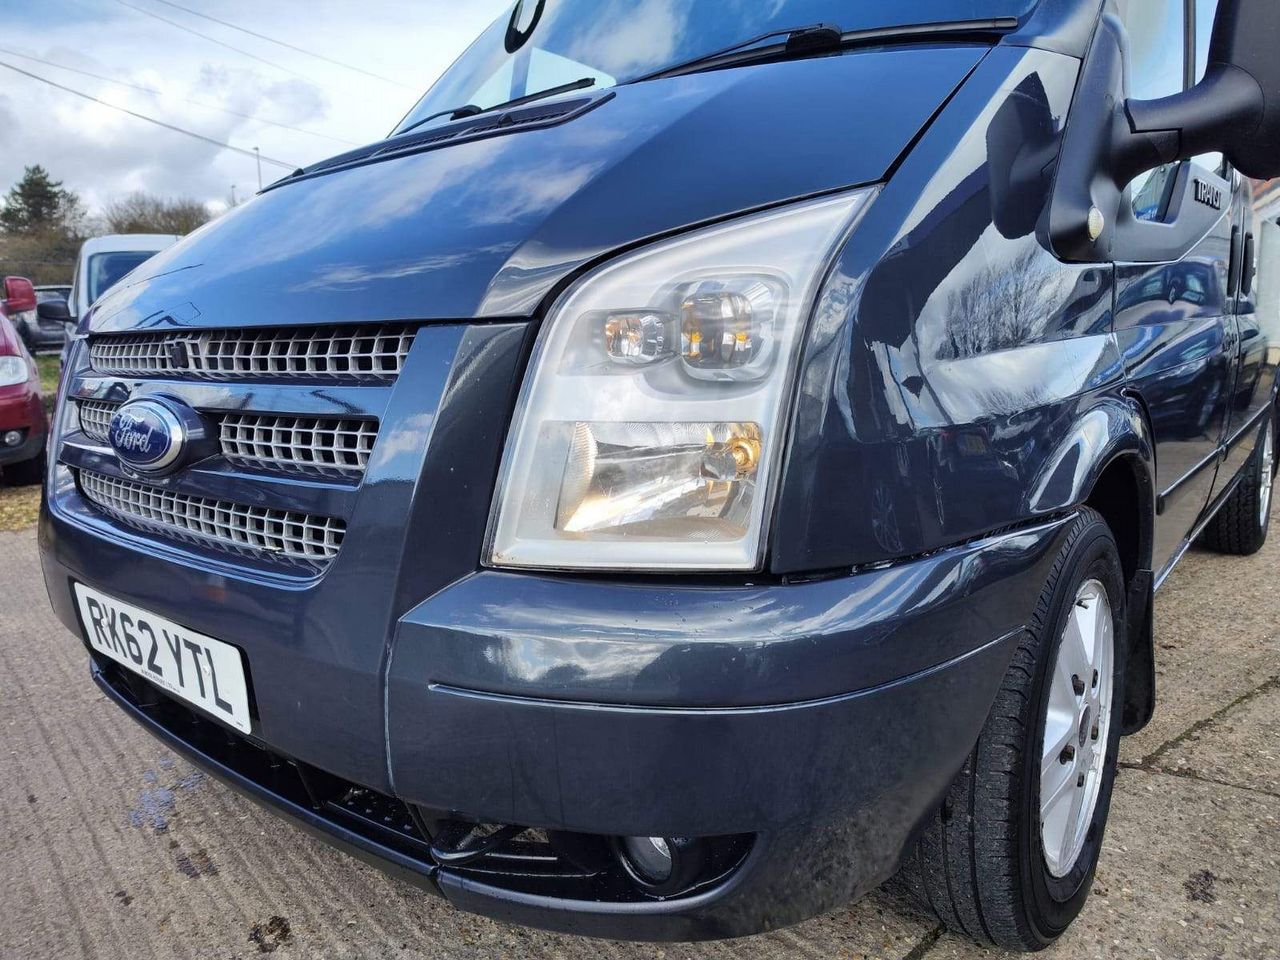 2012 Ford Transit 2.2 TDCi 280 Limited FWD L1 H1 5dr - Picture 4 of 34